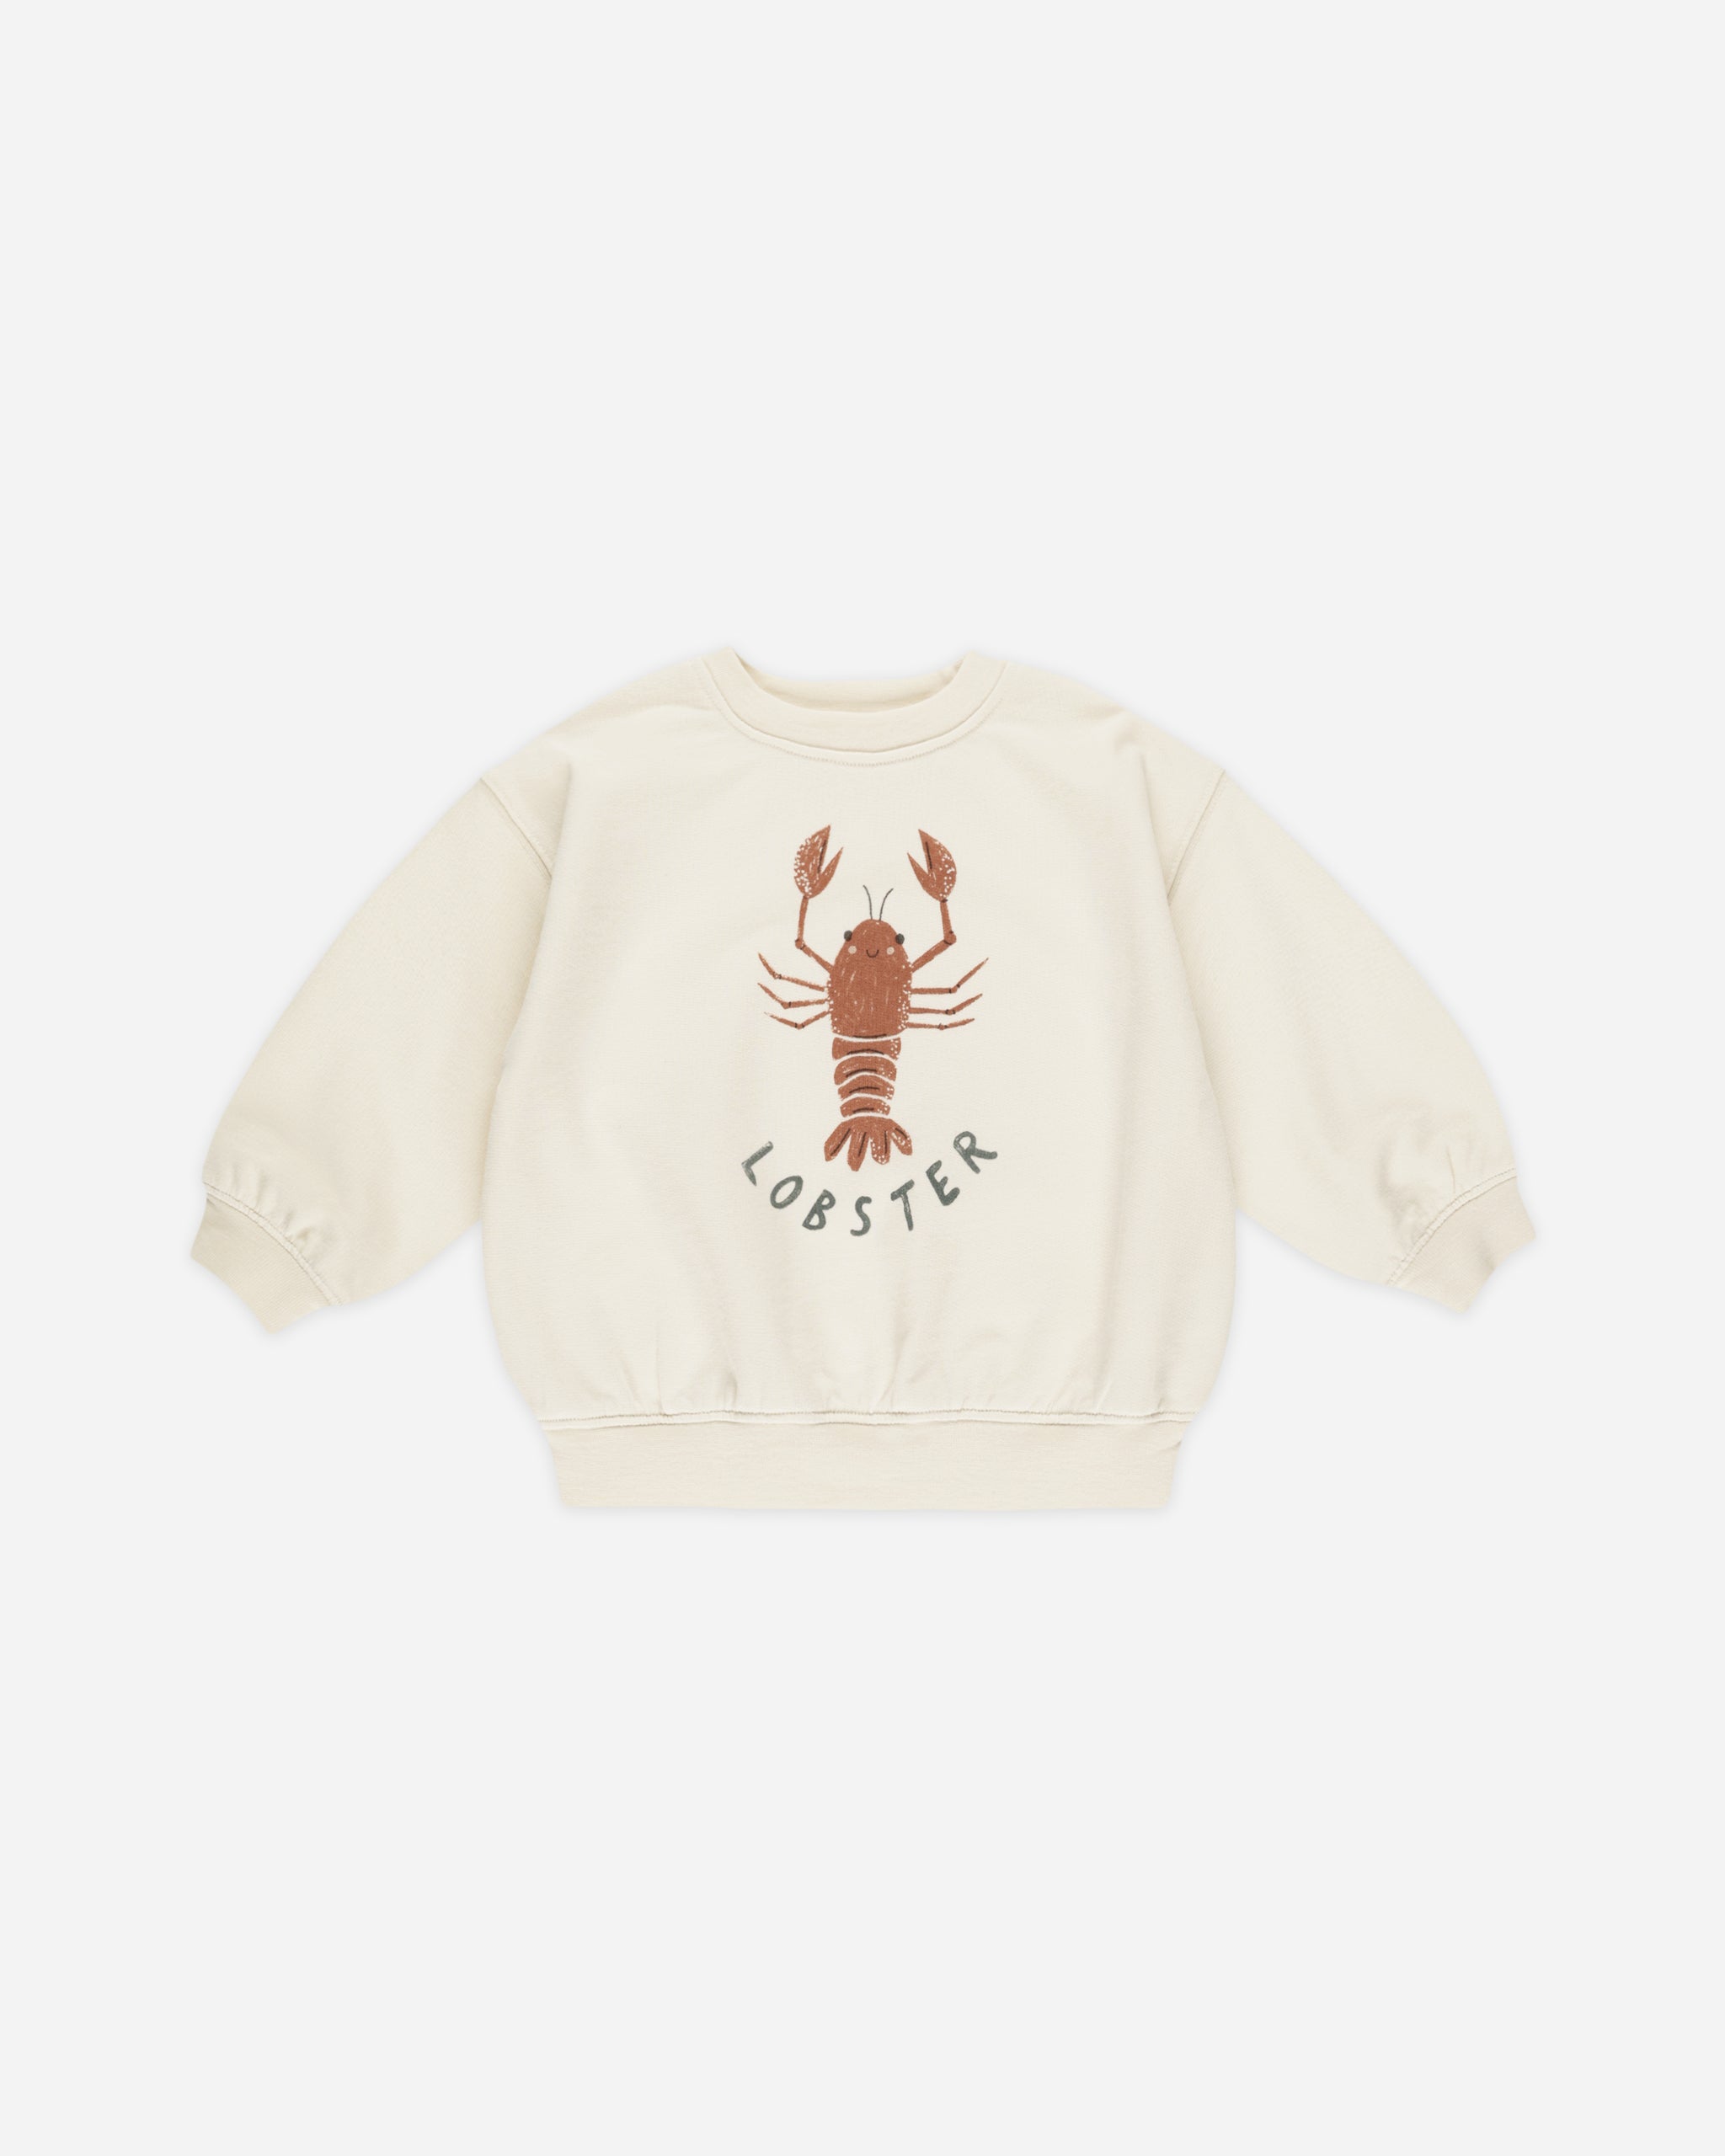 Sweatshirt || Lobster - Rylee + Cru | Kids Clothes | Trendy Baby Clothes | Modern Infant Outfits |